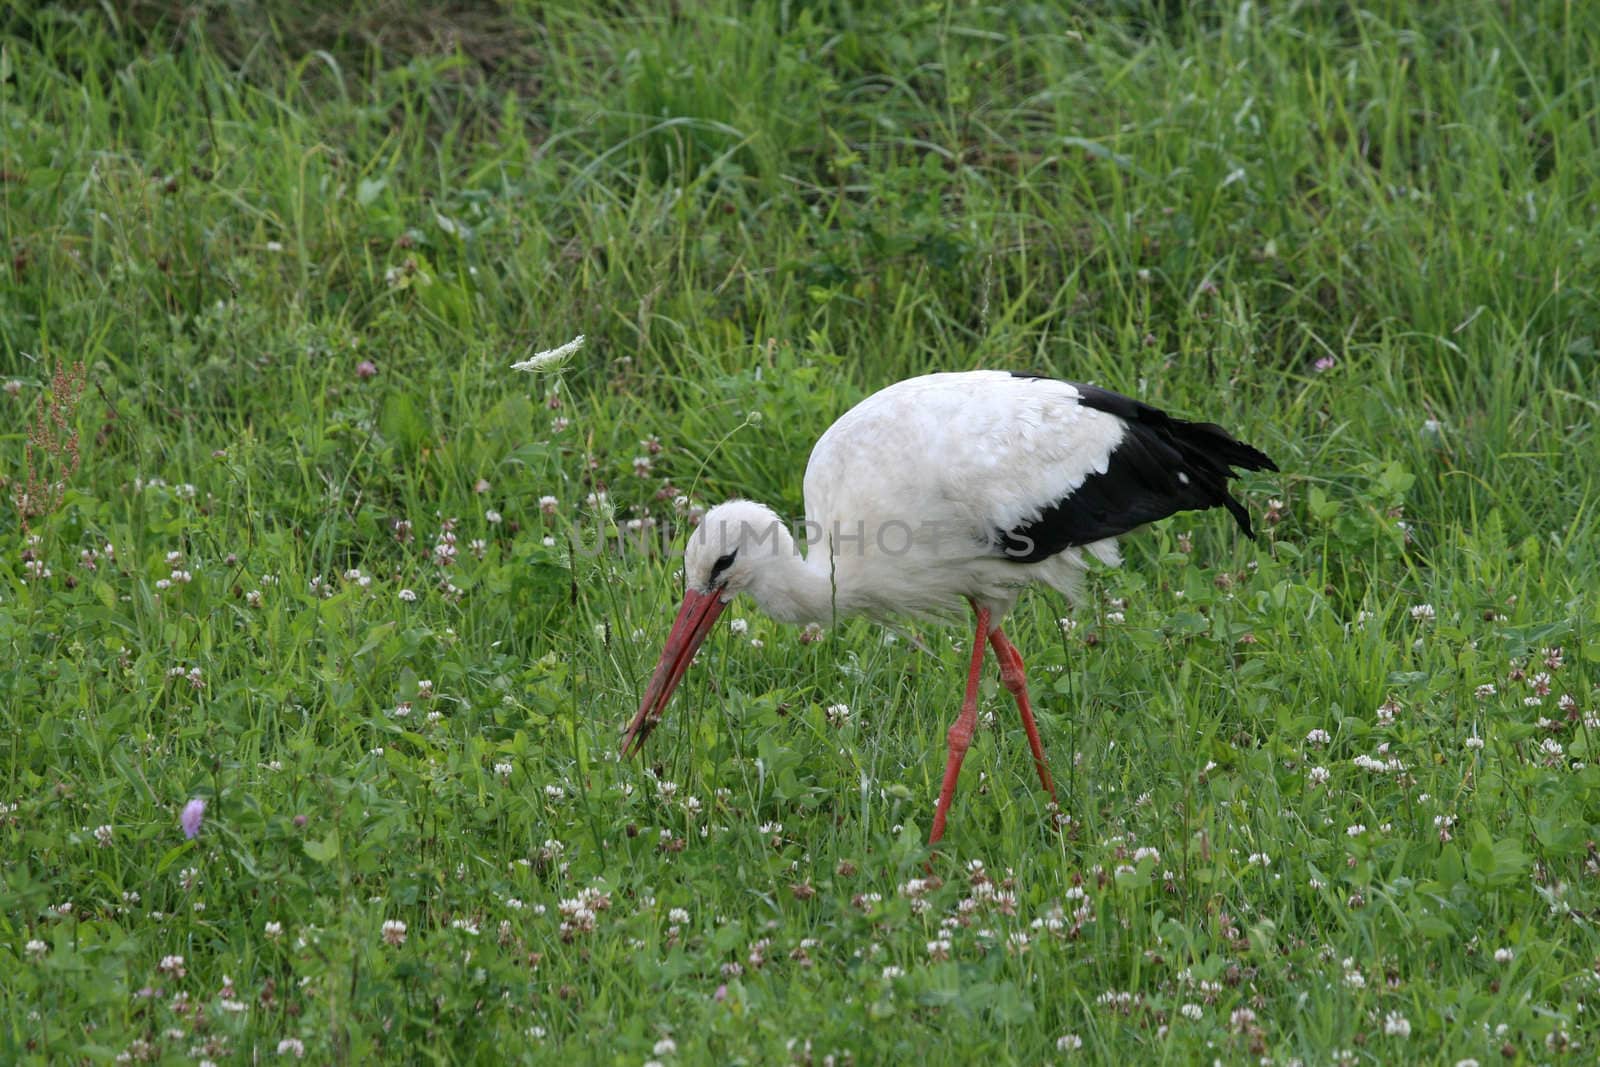 Stork, who is looking for a snack in the meadow.